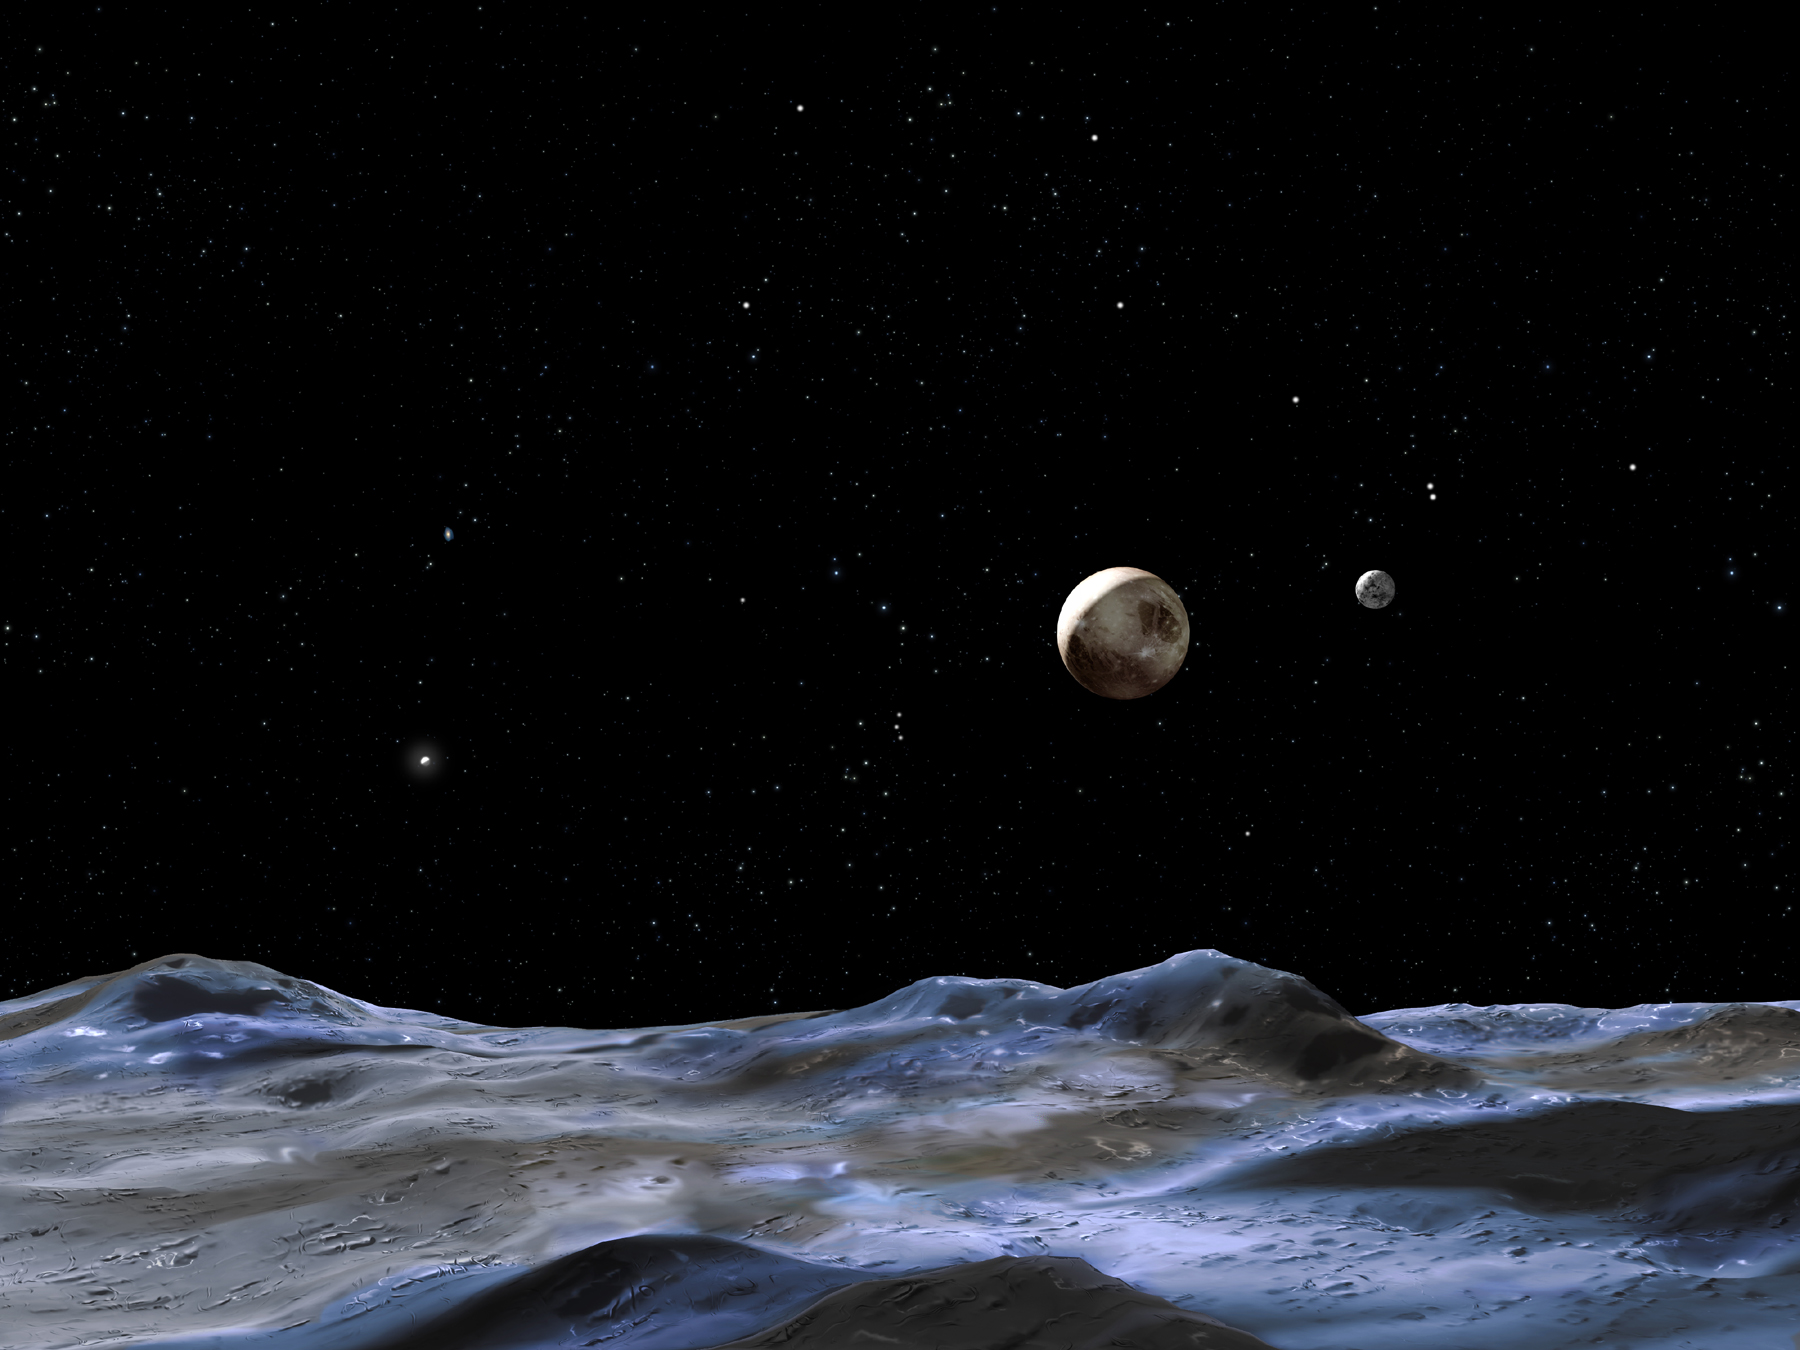 Pluto and two of its moons as seen from the third moon.